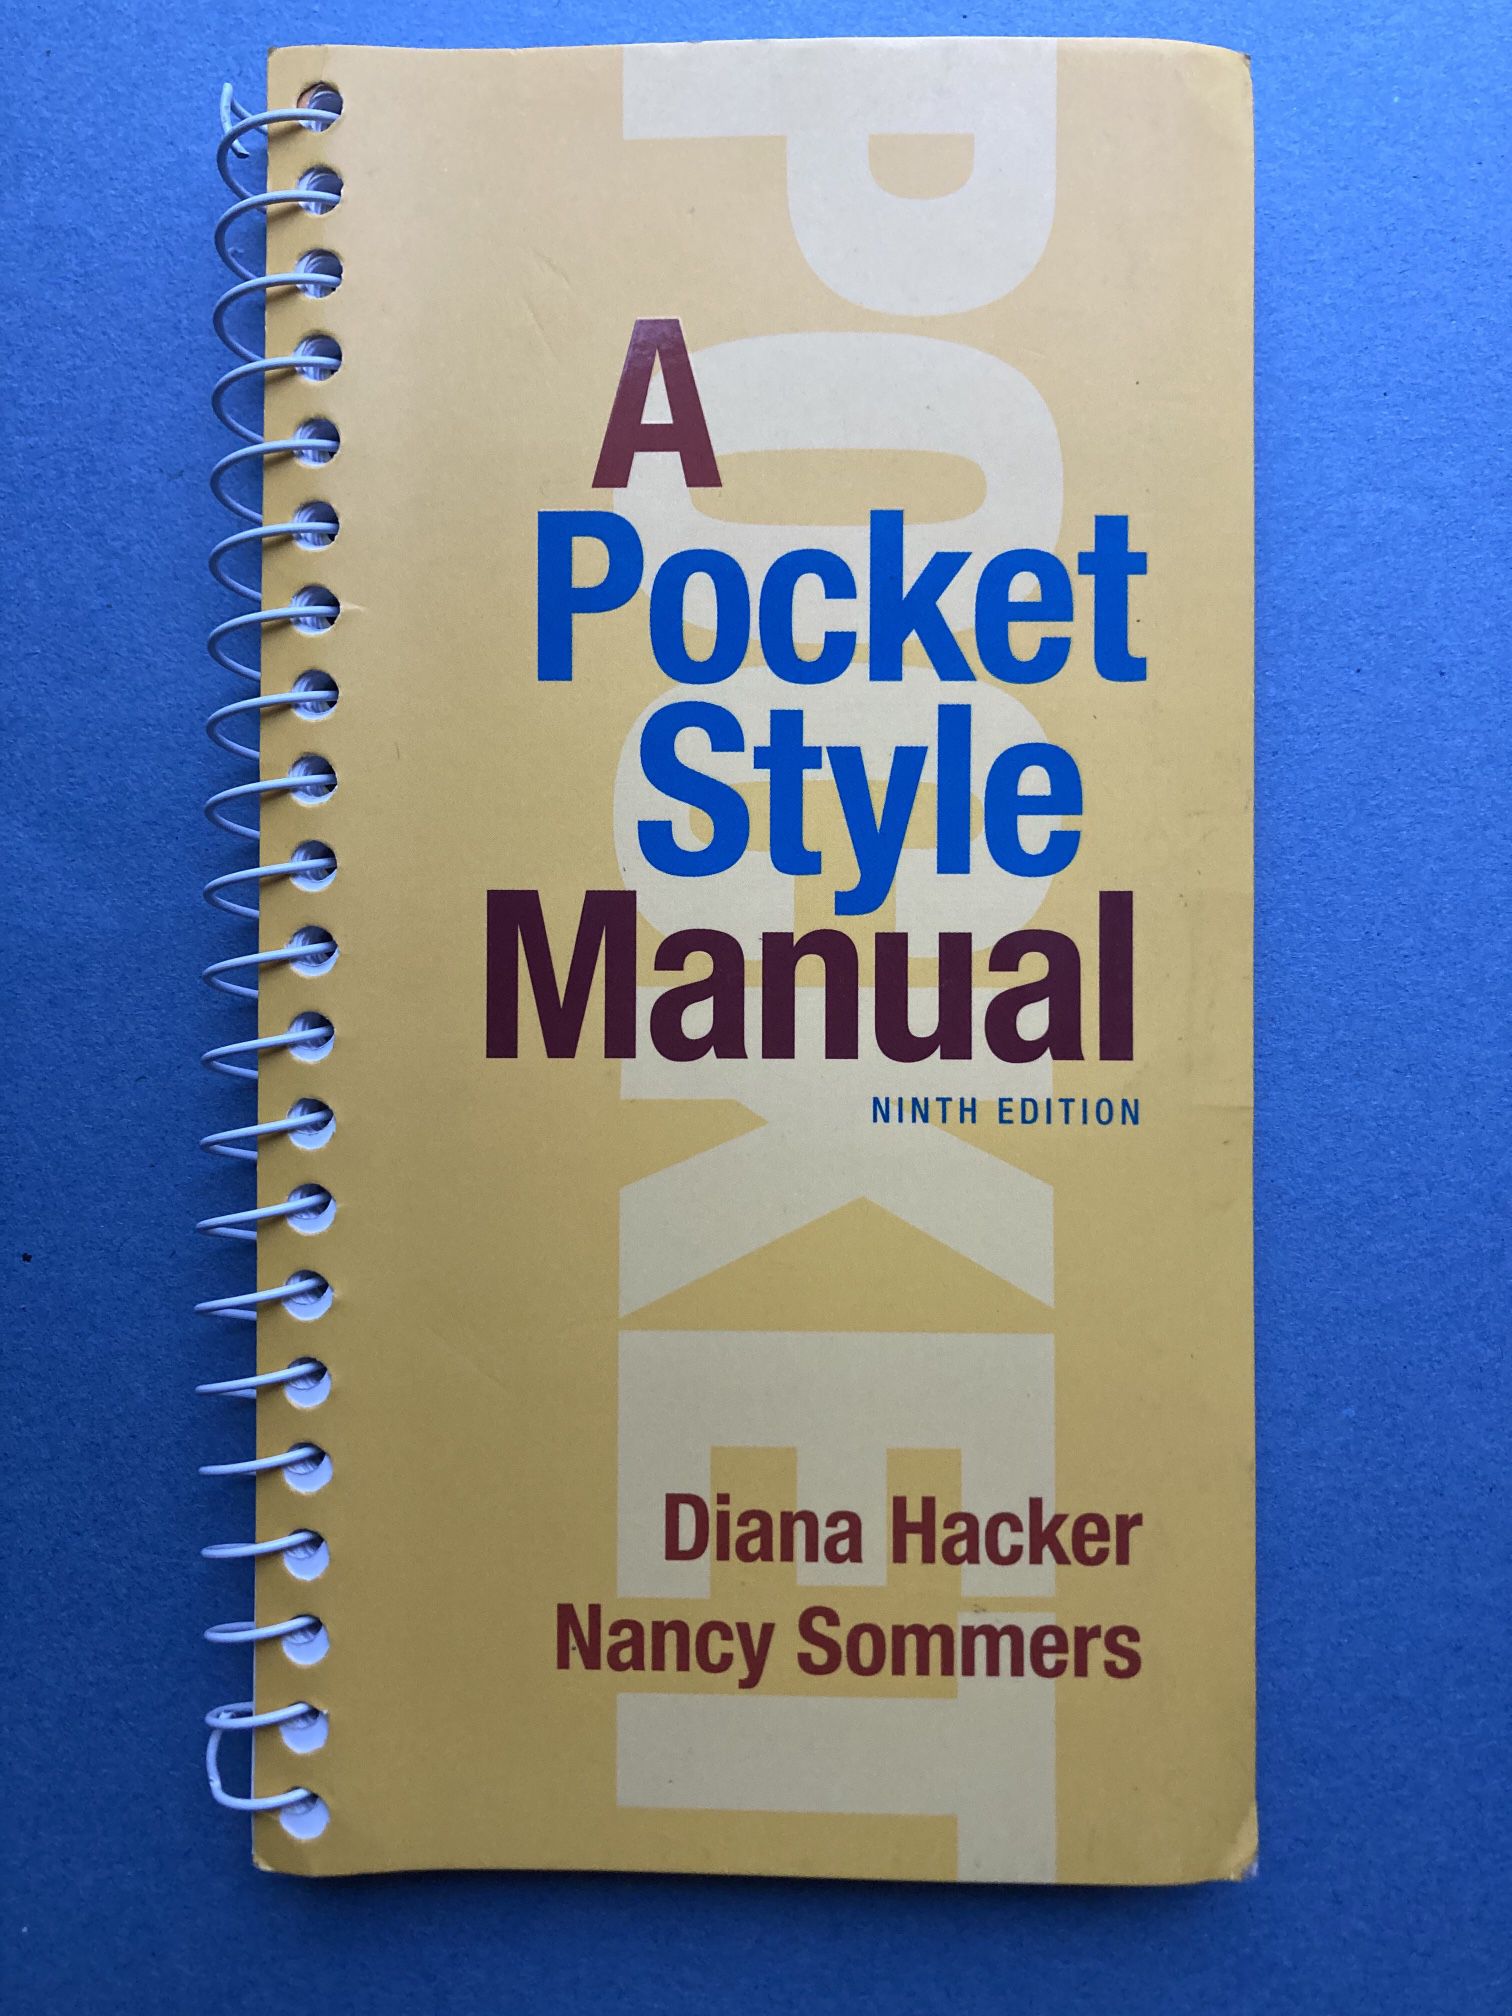 A Pocket Style Manual 9th Edition